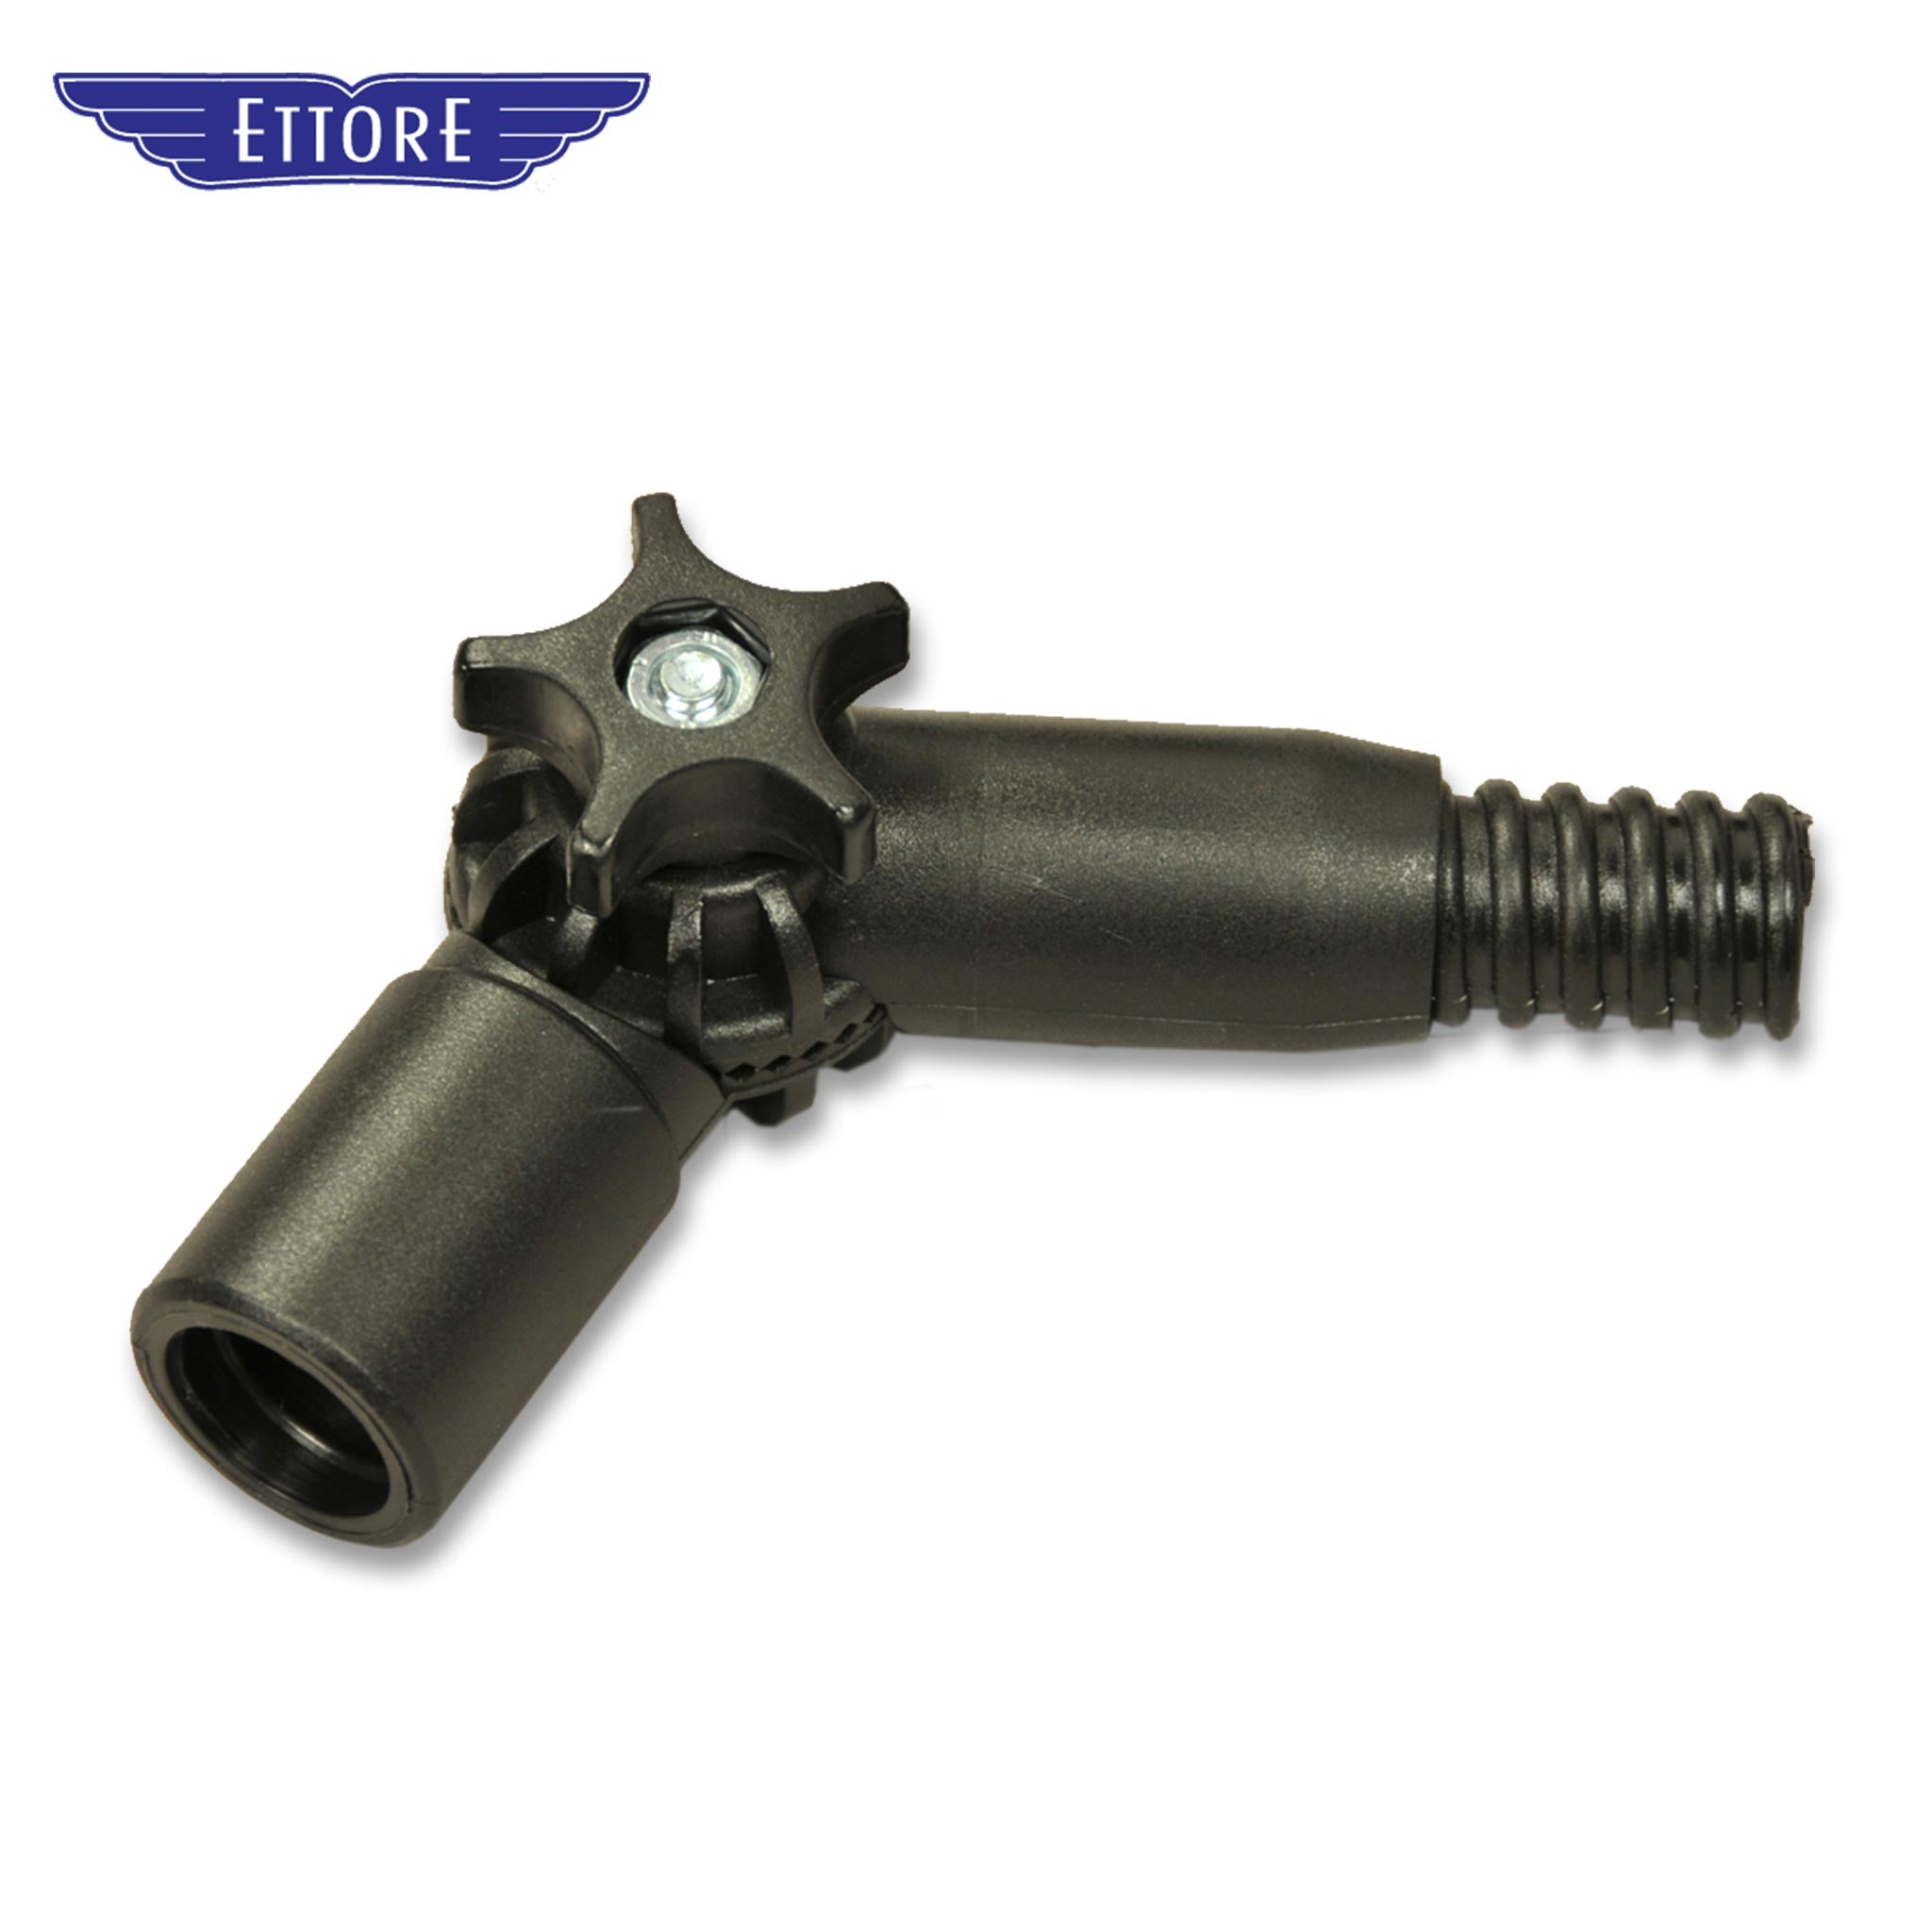 Ettore Adjustable Angle Joint